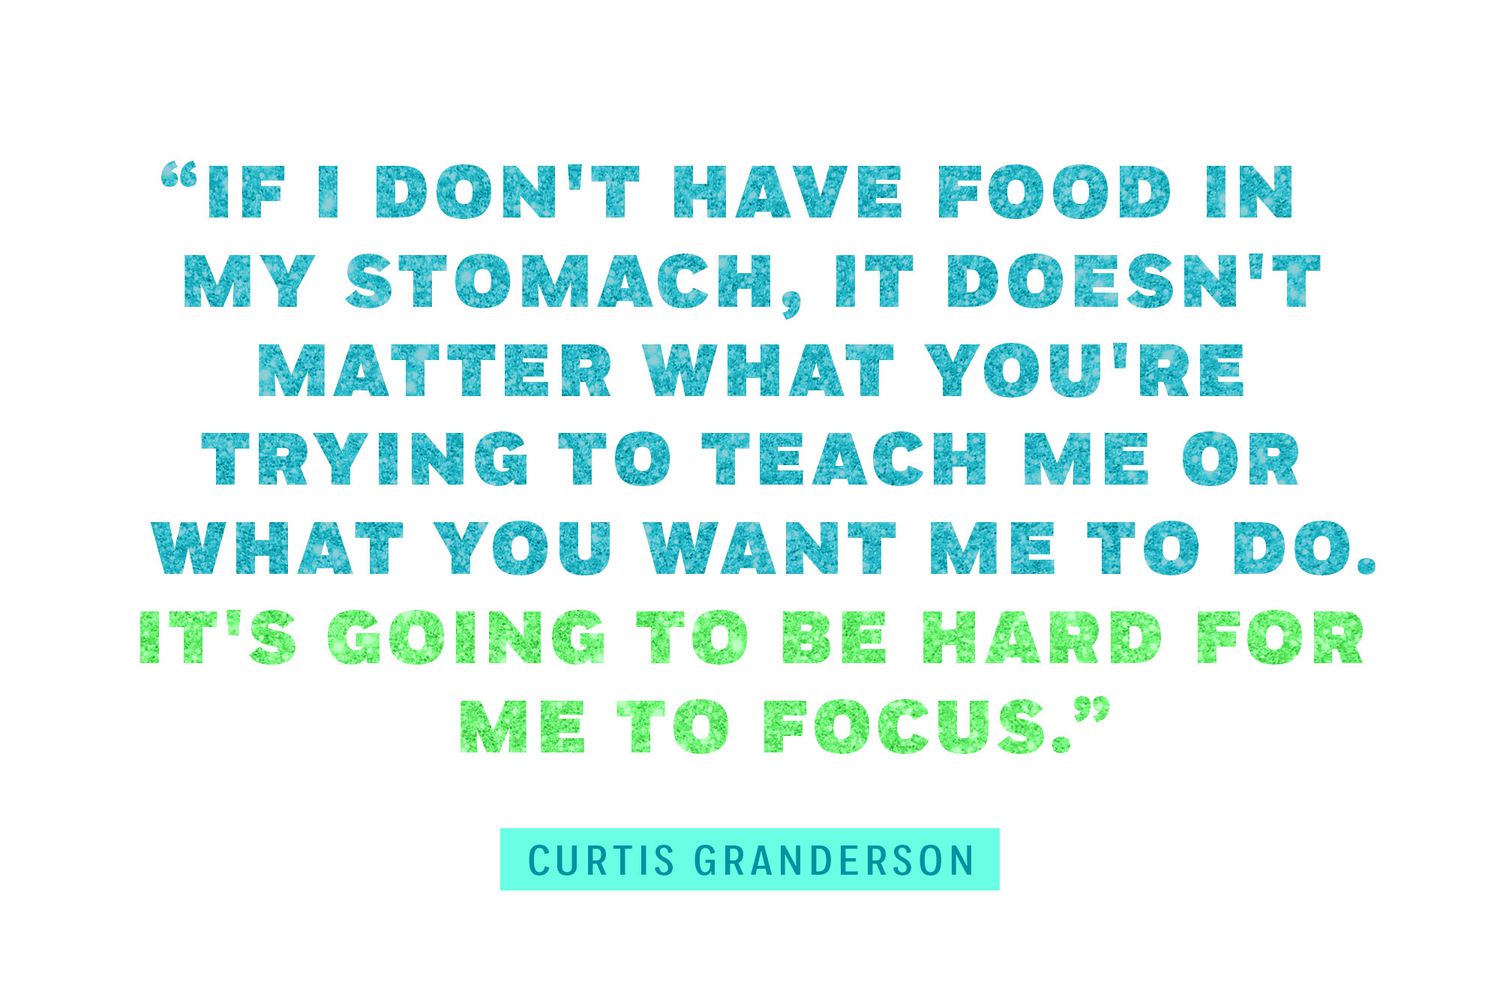 "If I don't have food in my stomach, it doesn't matter what you're trying to teach me or what you want me to learn, it is going to be hard for me to focus."